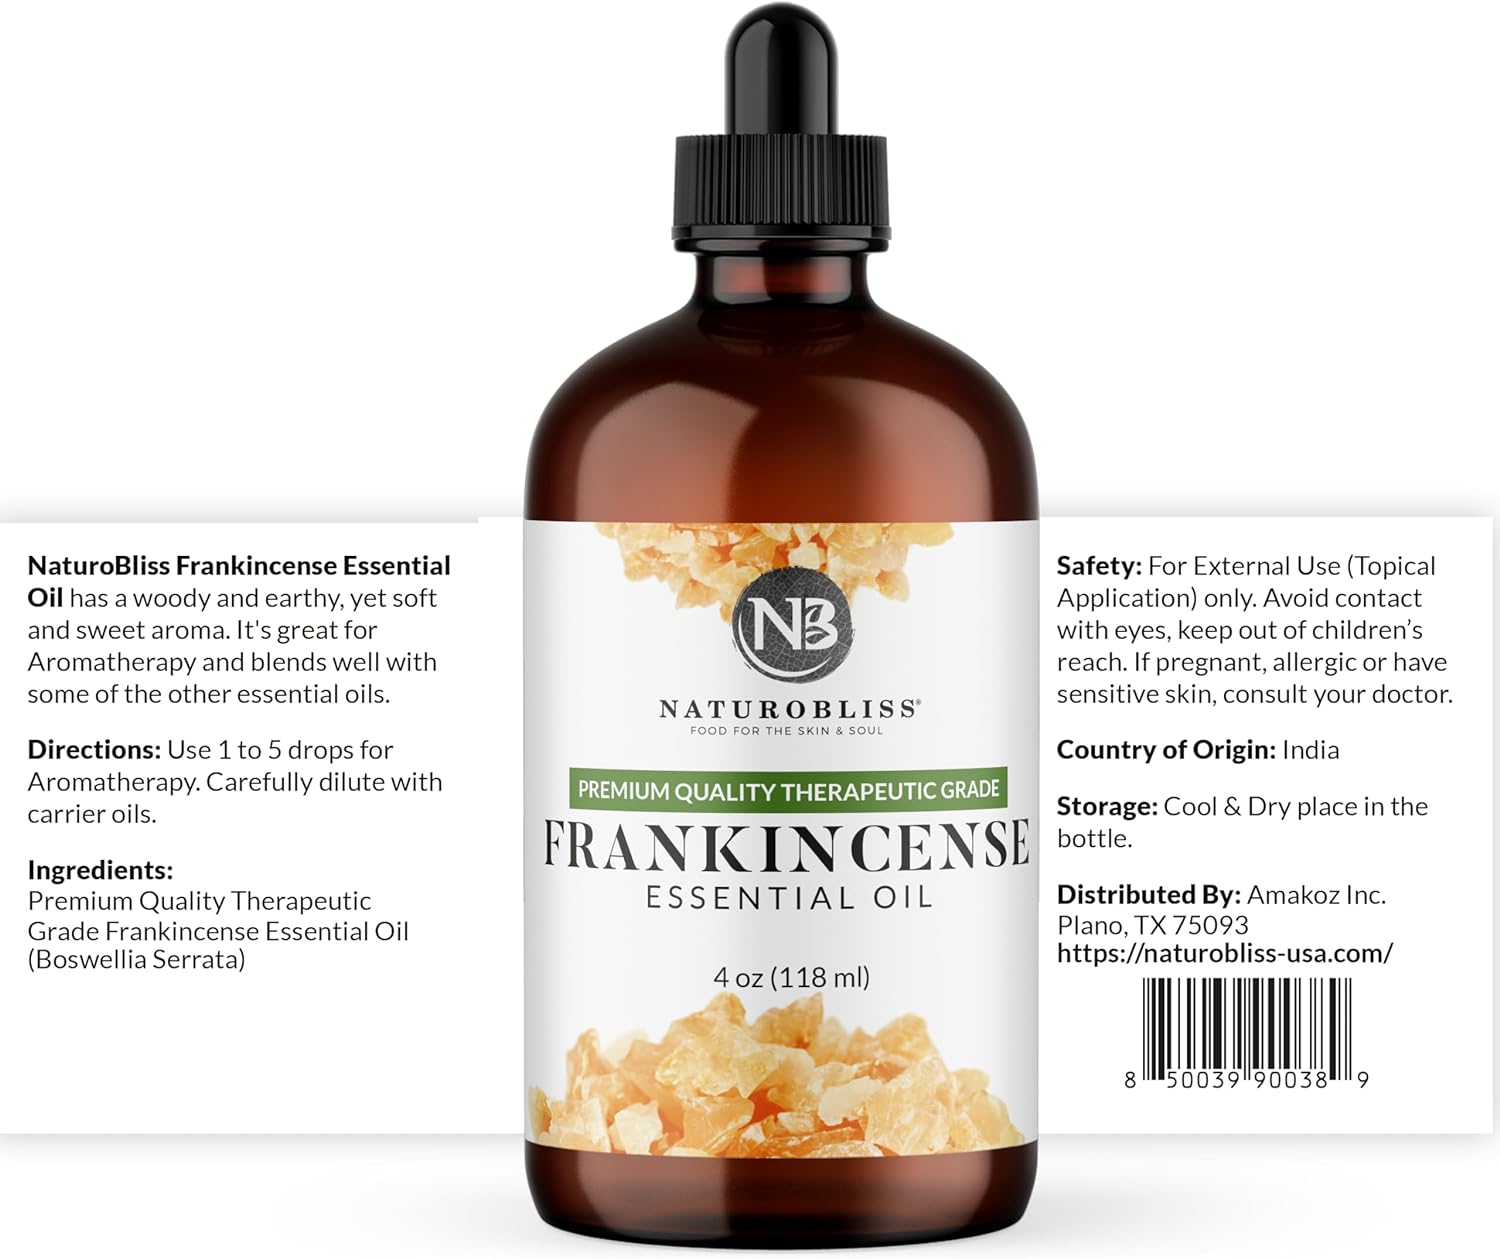 NaturoBliss 100% Pure Frankincense Essential Oil Therapeutic Grade Premium Quality (4 fl. oz) with Glass Dropper, Perfect for Aromatherapy : Health & Household